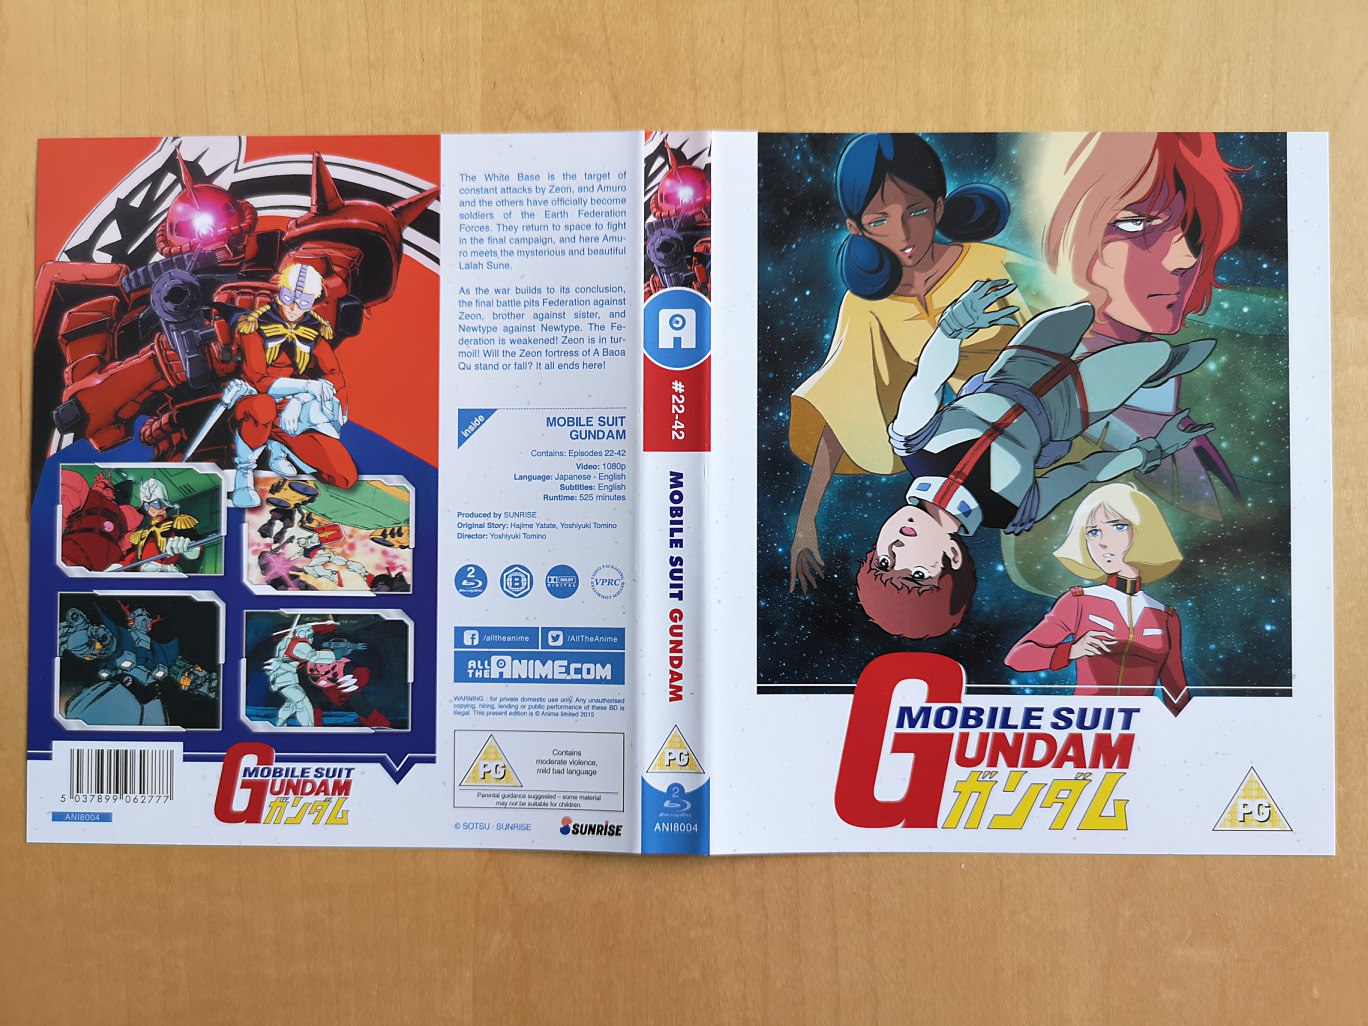 Mobile Suit Gundam 0079 Parts 1 & 2 (Collector's Edition Blu-ray